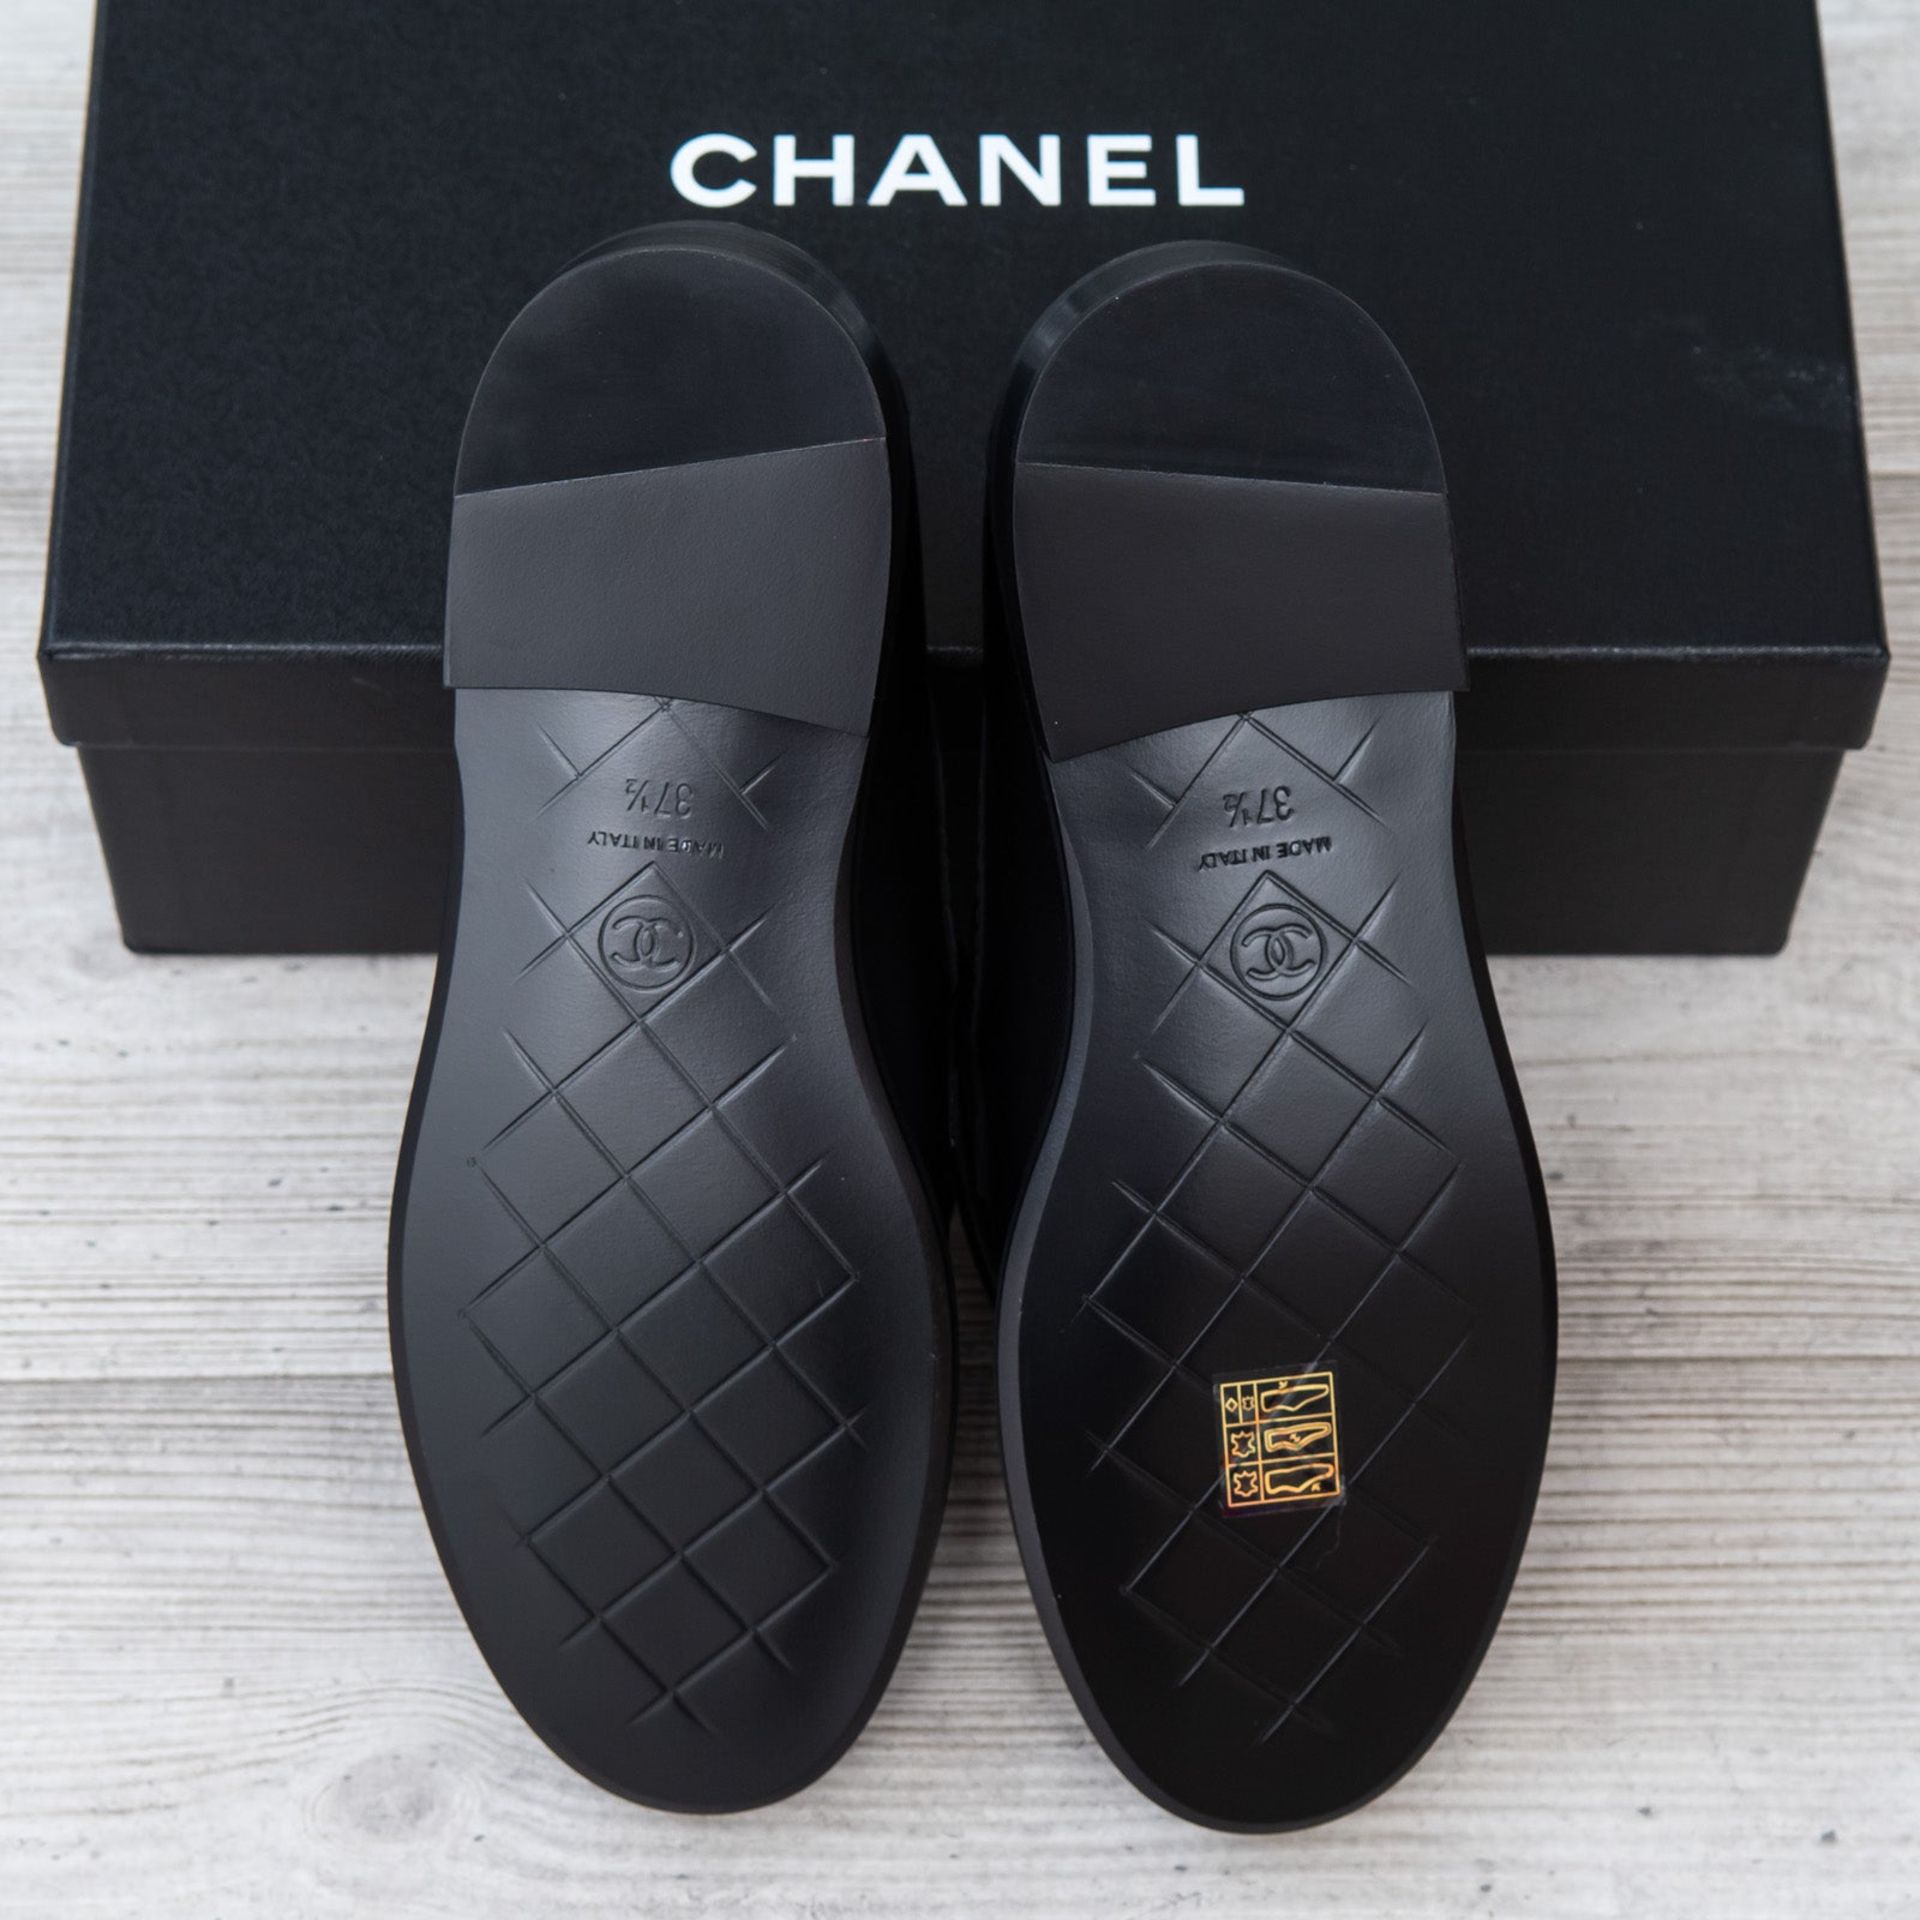 Chanel Black Leather Loafers - Image 5 of 5